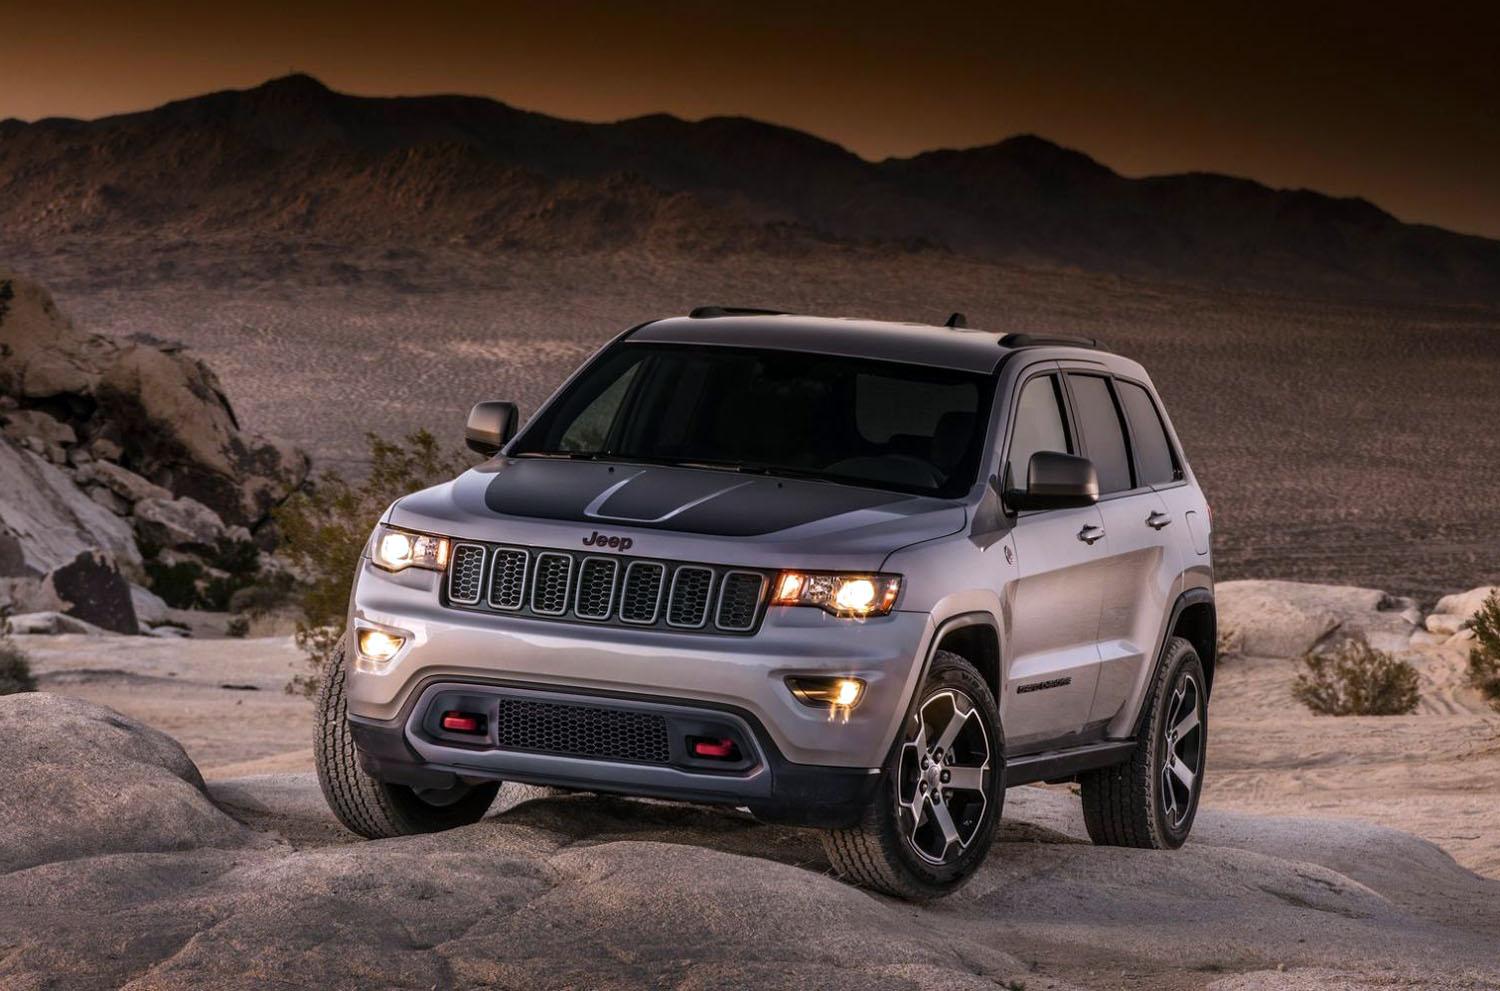 Jeep Cherokee Wallpaper HD Photo, Wallpaper and other Image